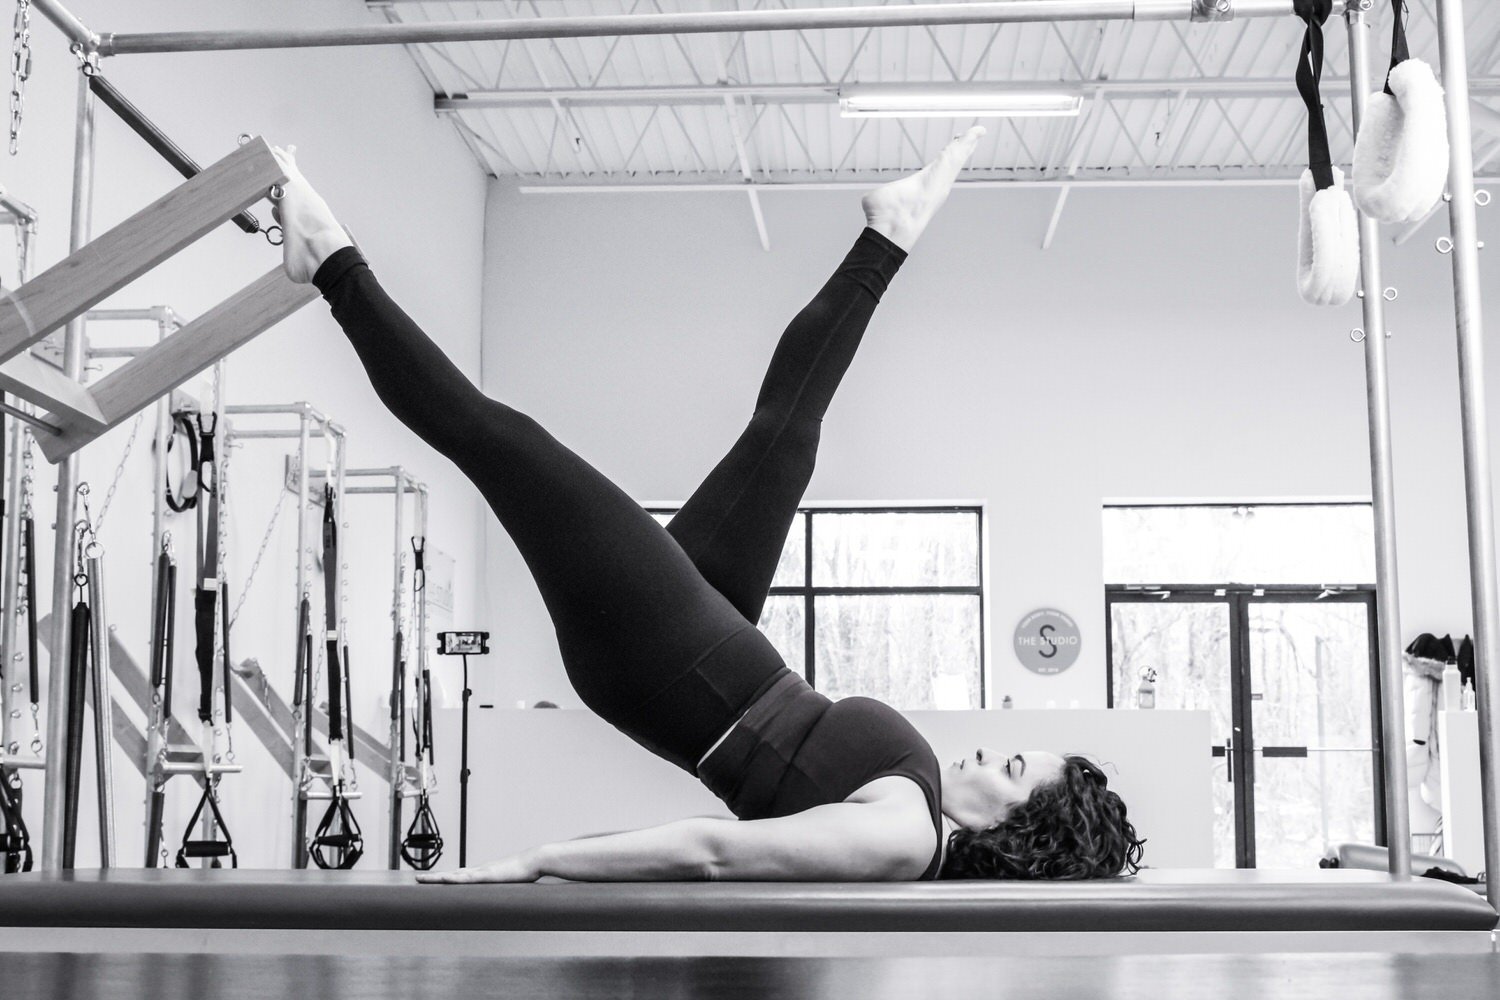 Pricing for Pilates Classes, New Jersey  The Studio - Tara Lyn Pilates —  The Studio - Tara Lyn Pilates